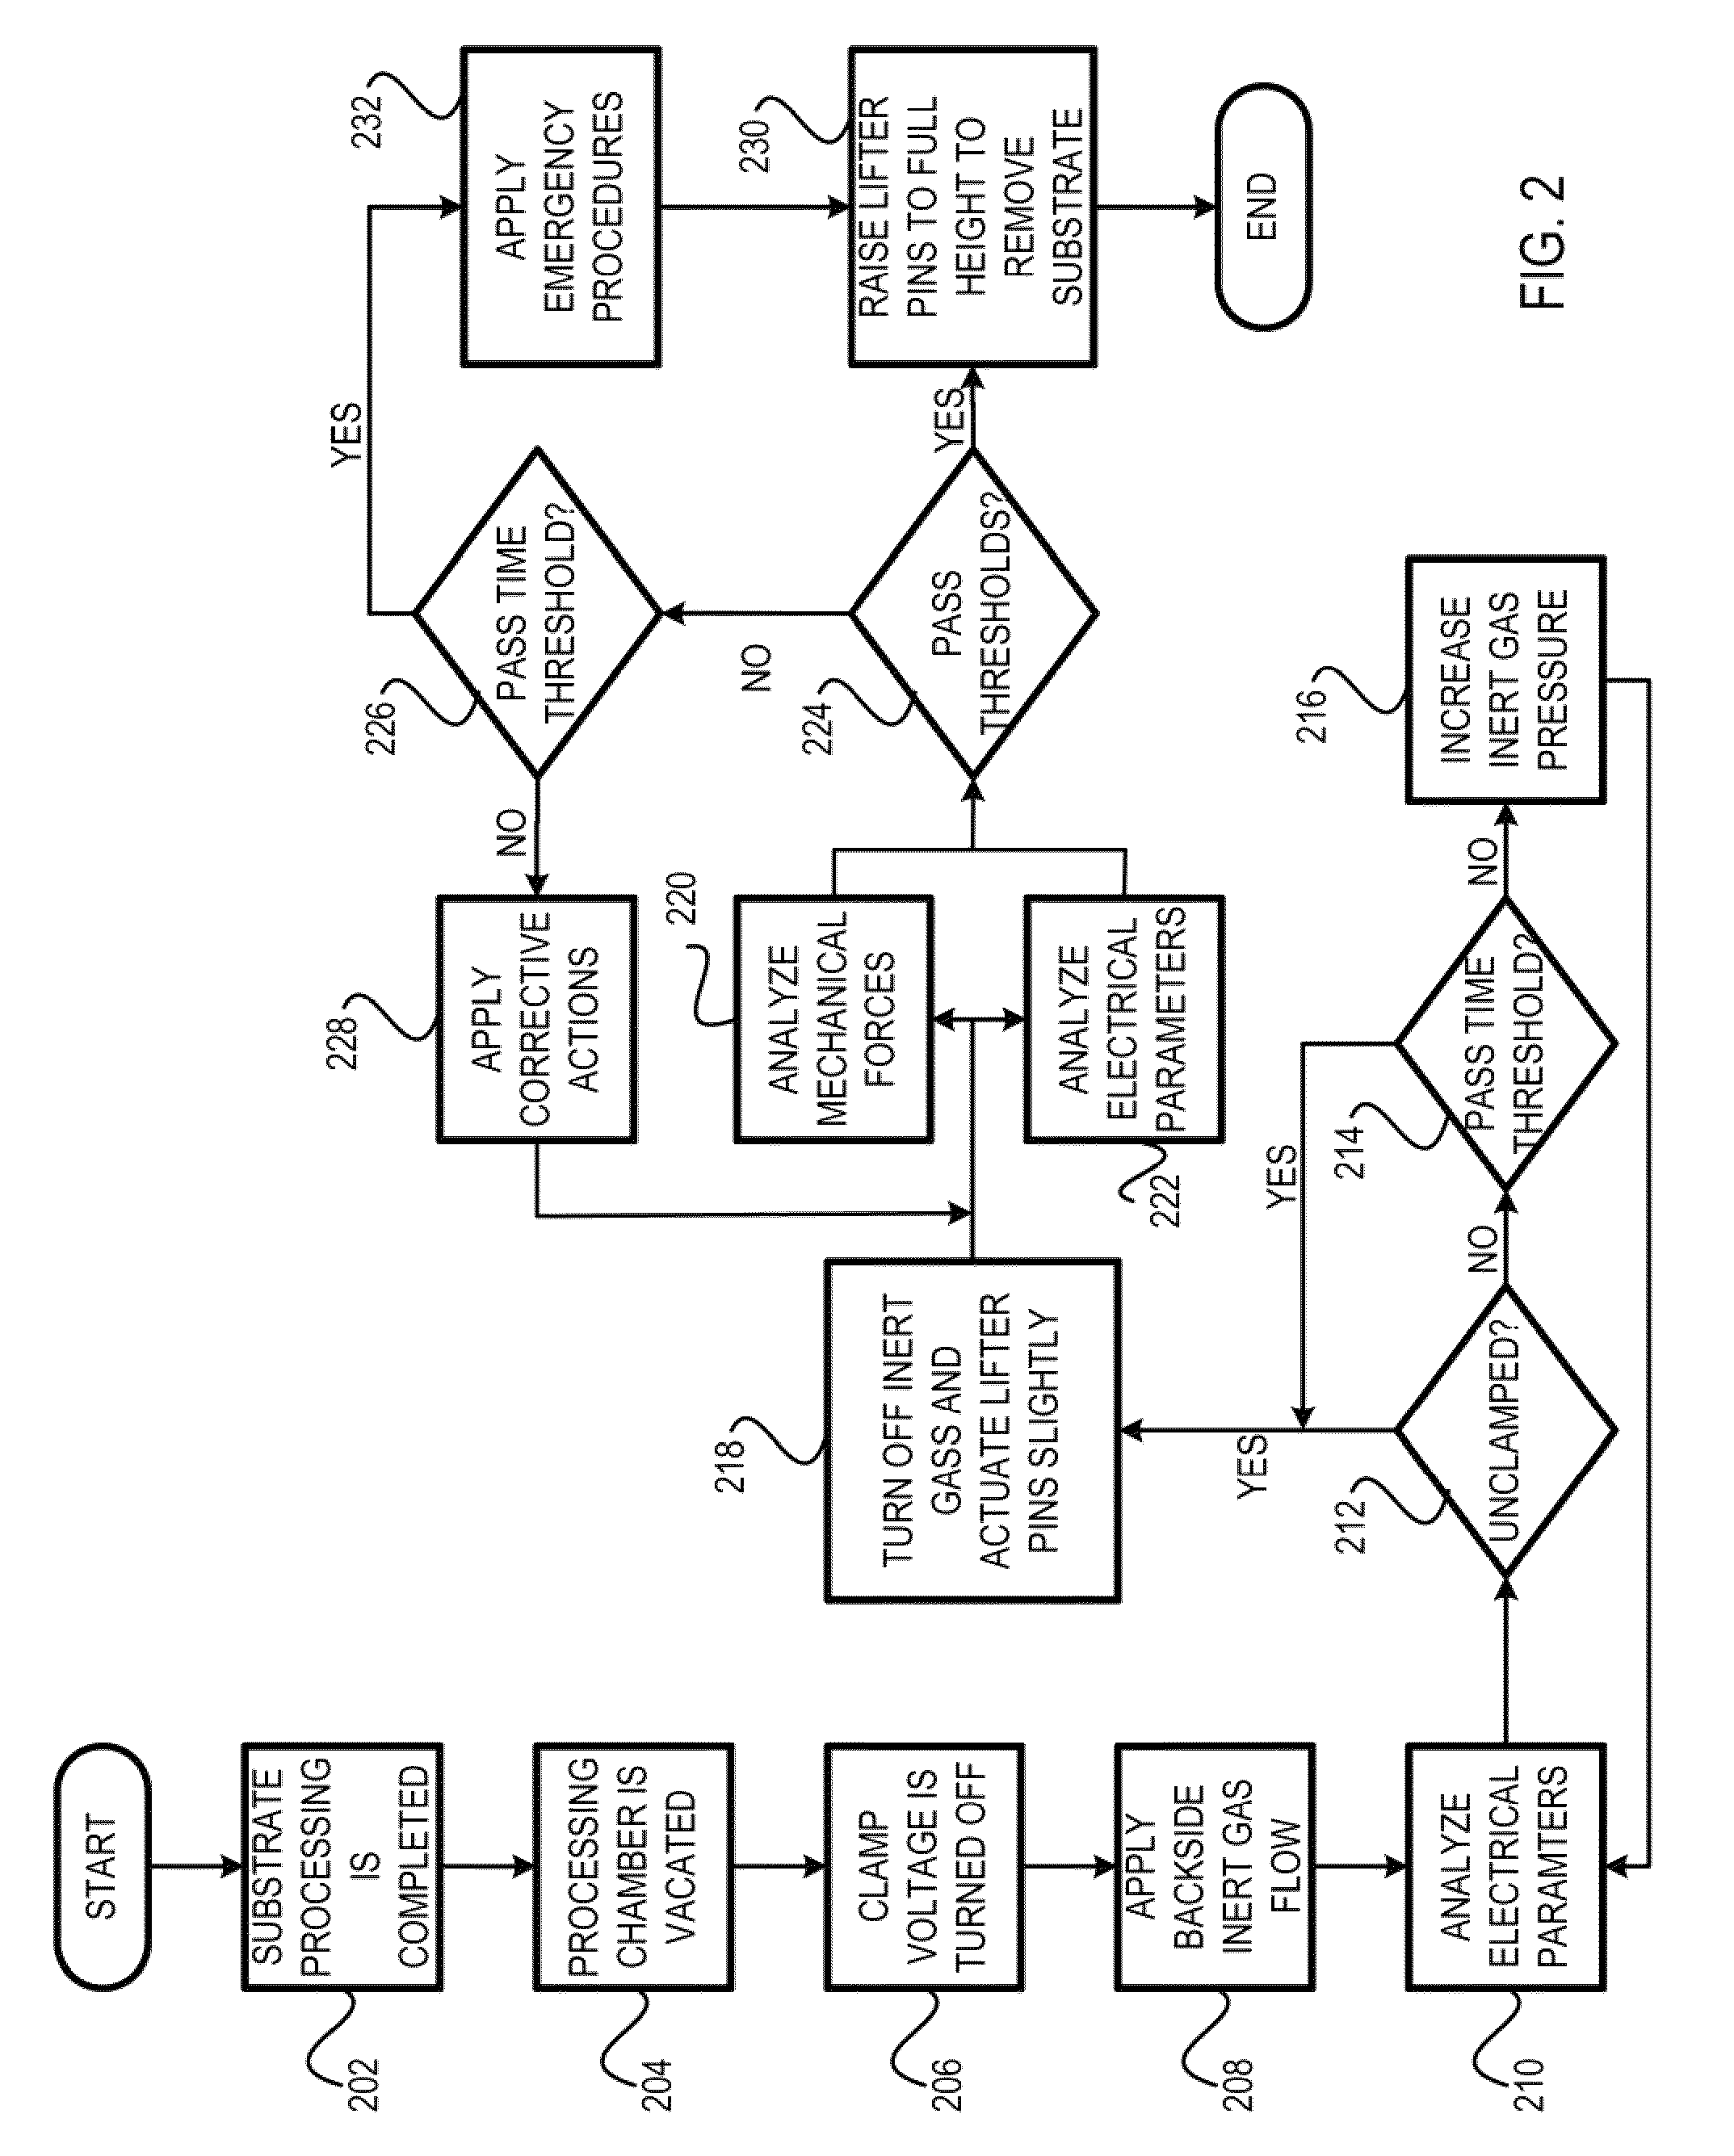 Methods and arrangement for plasma dechuck optimization based on coupling of plasma signaling to substrate position and potential